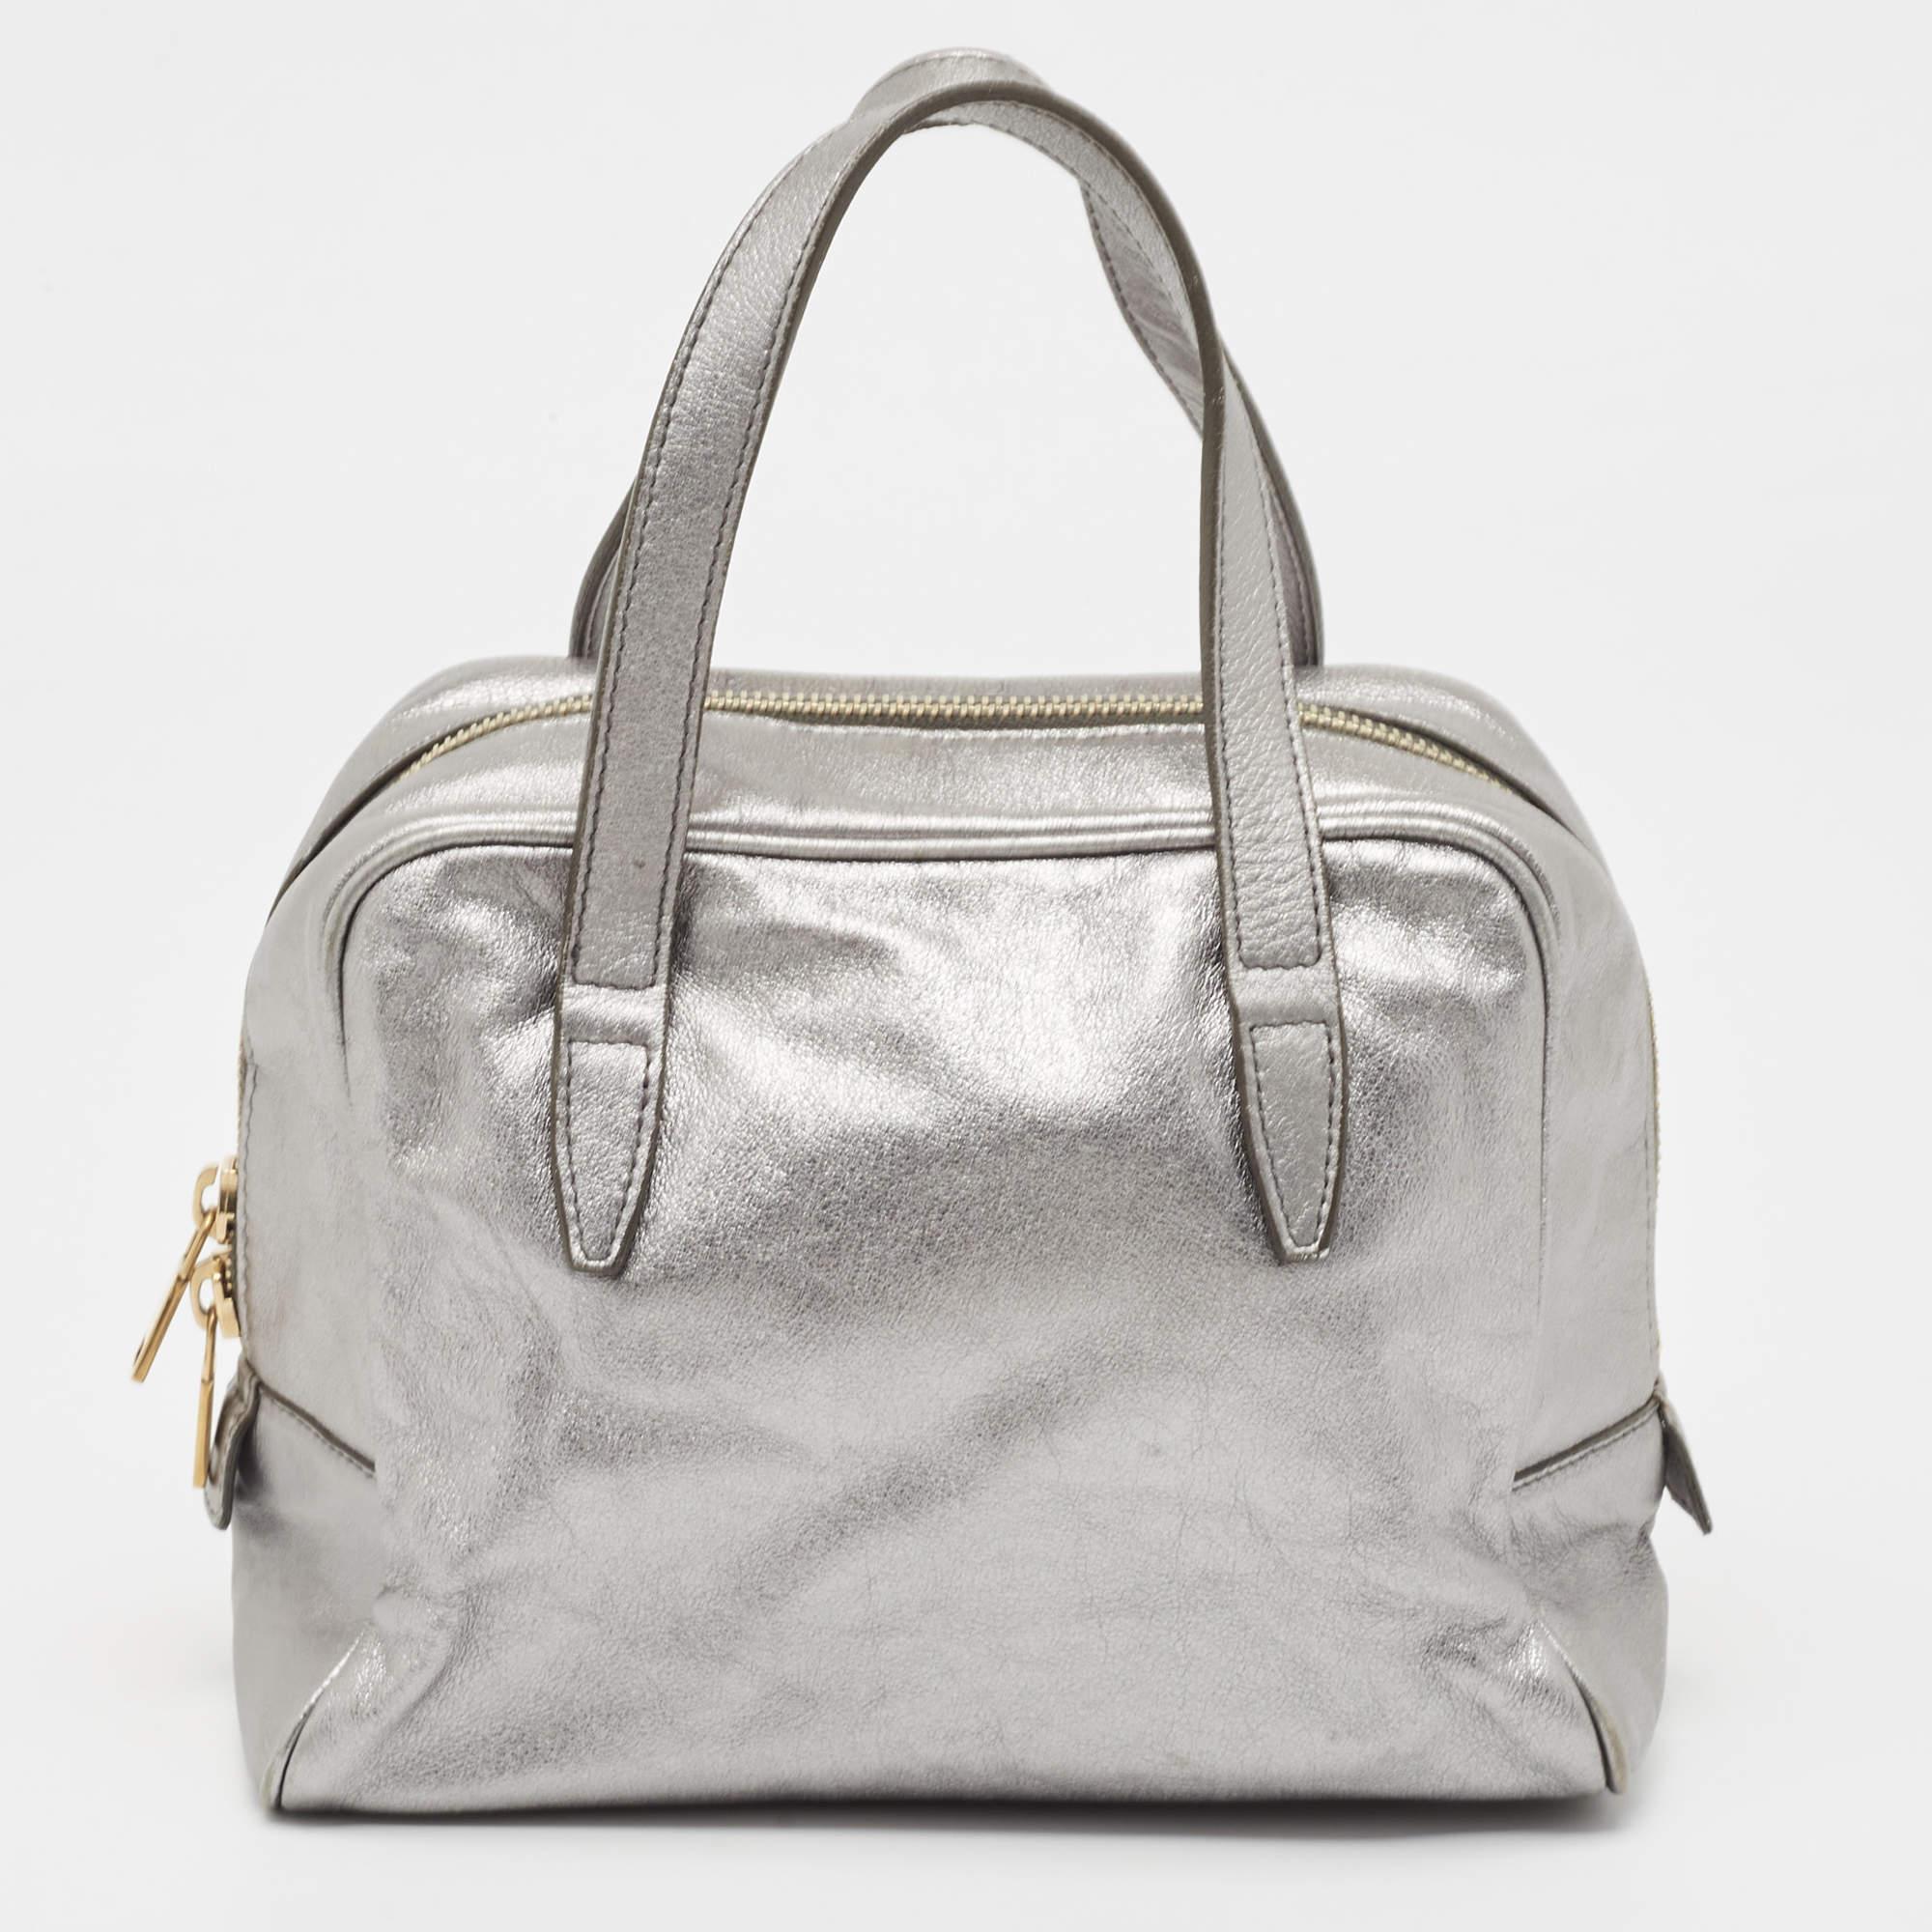 Yves Saint Laurent Silver Leather Y Mail Mini Bag 5